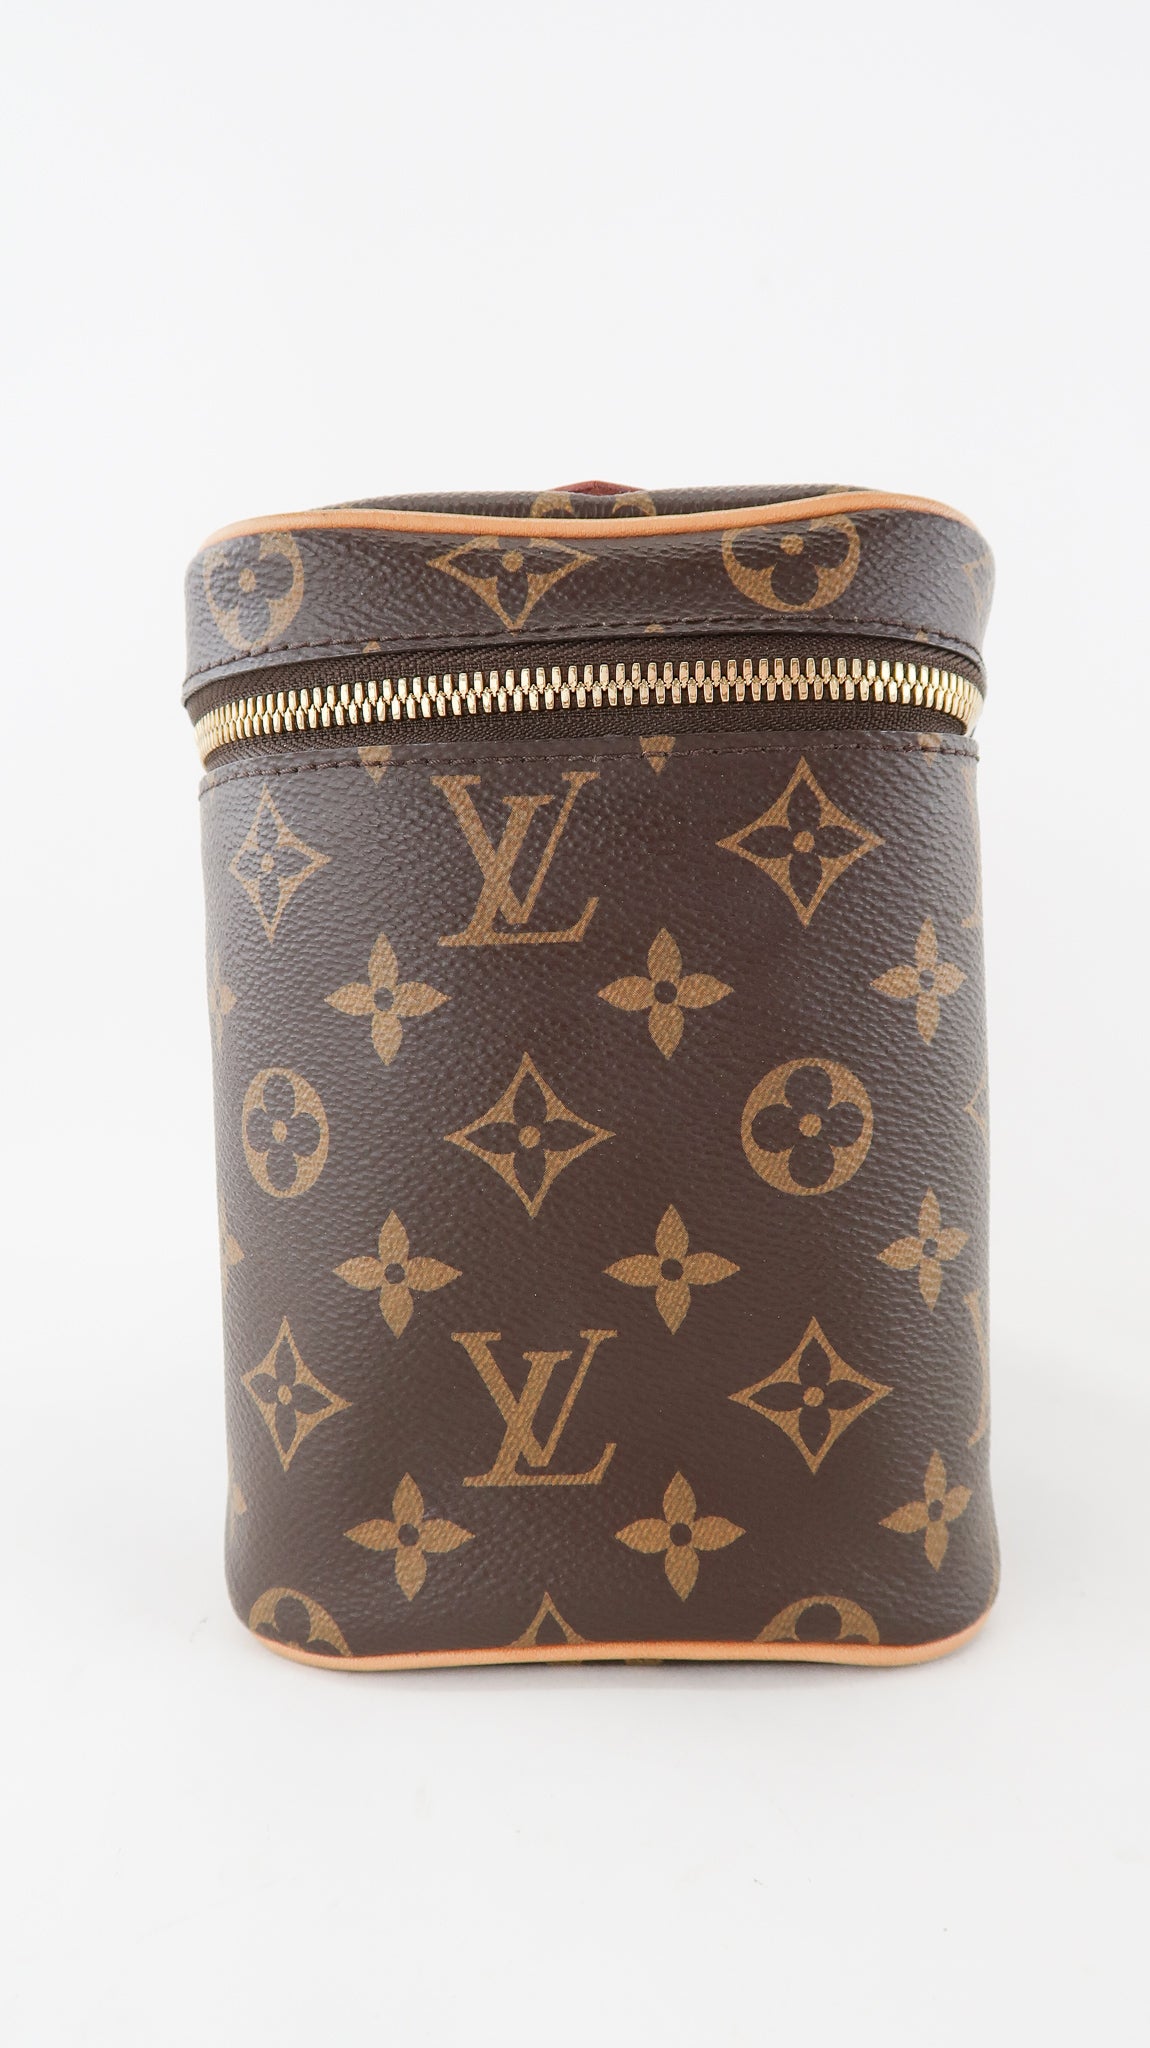 Louis Vuitton 2018 pre-owned Nice BB Vanity Case - Farfetch